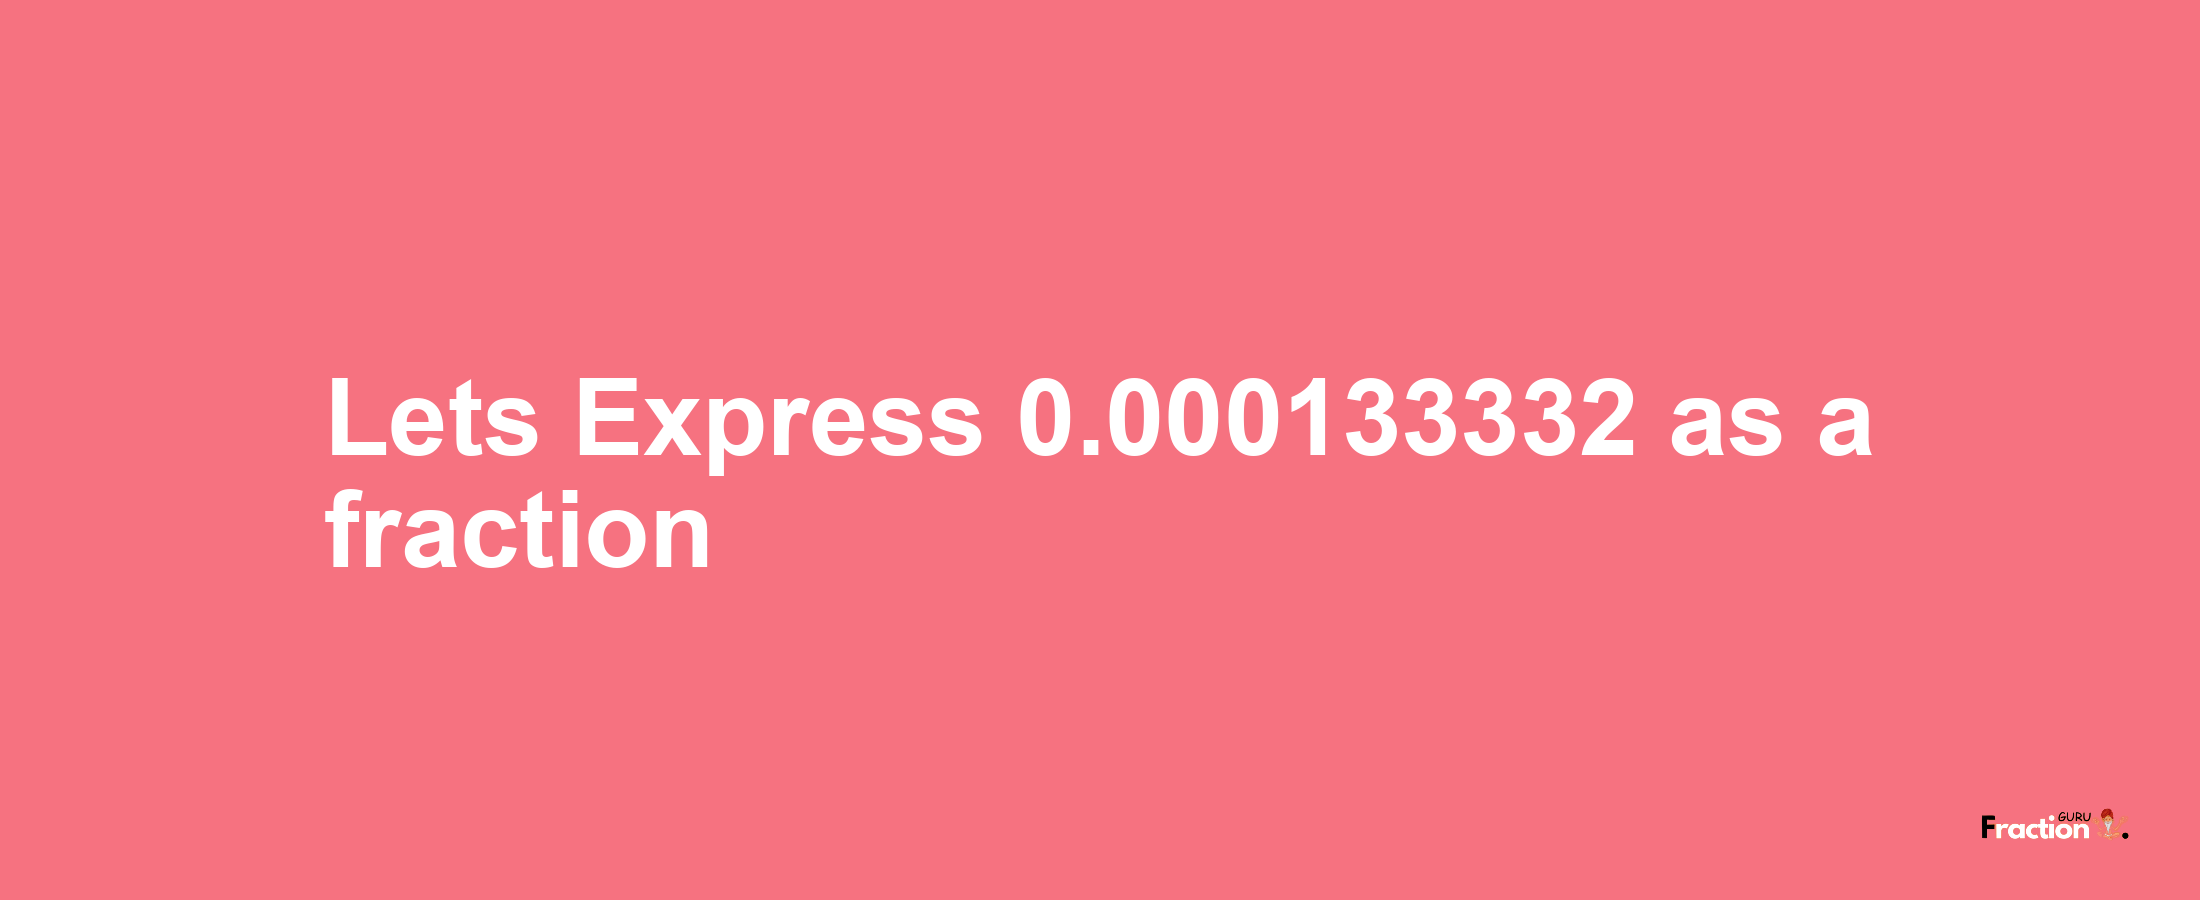 Lets Express 0.000133332 as afraction